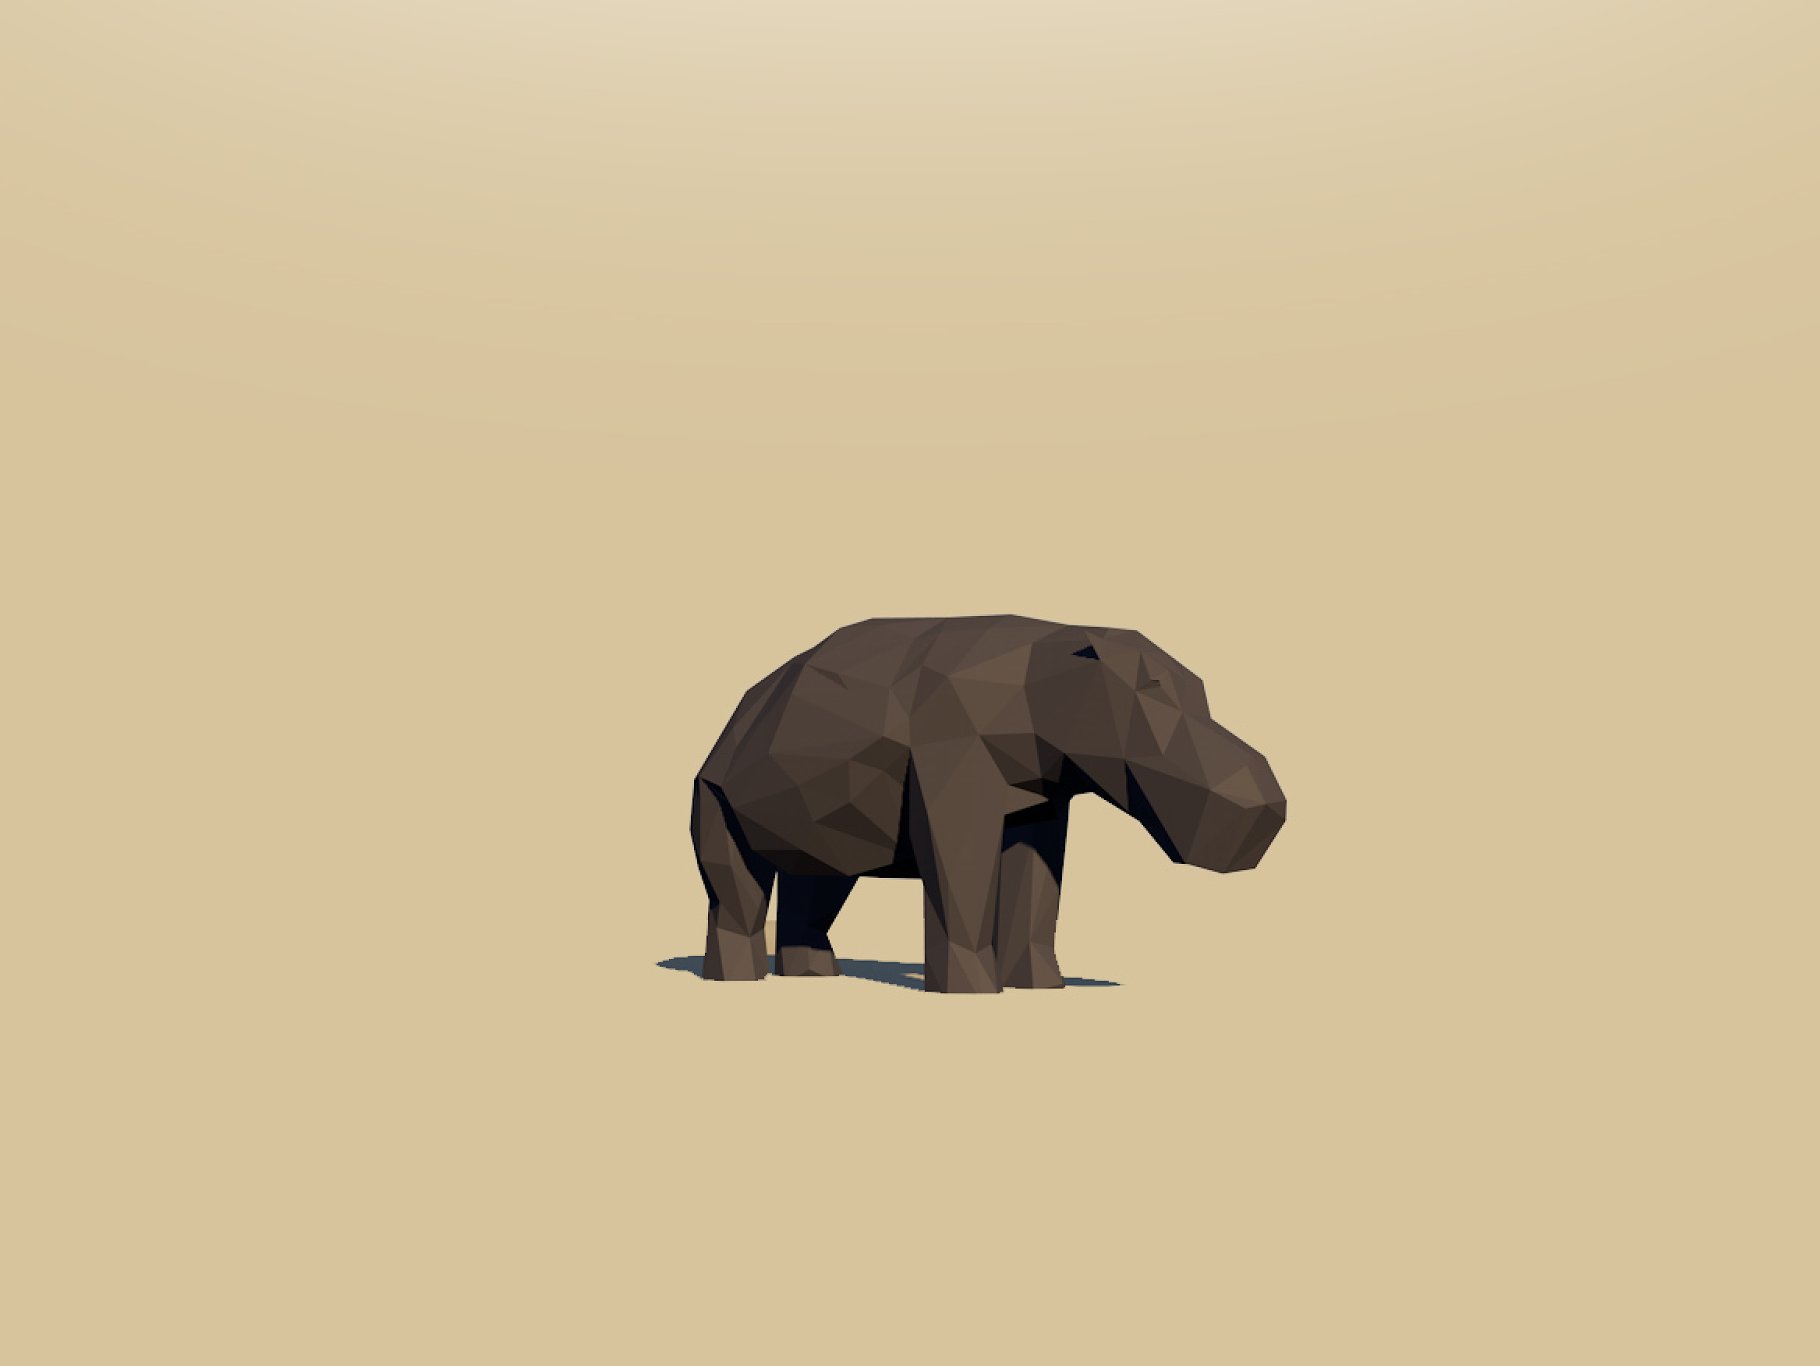 Lowpoly hippo mockup on a beige background.